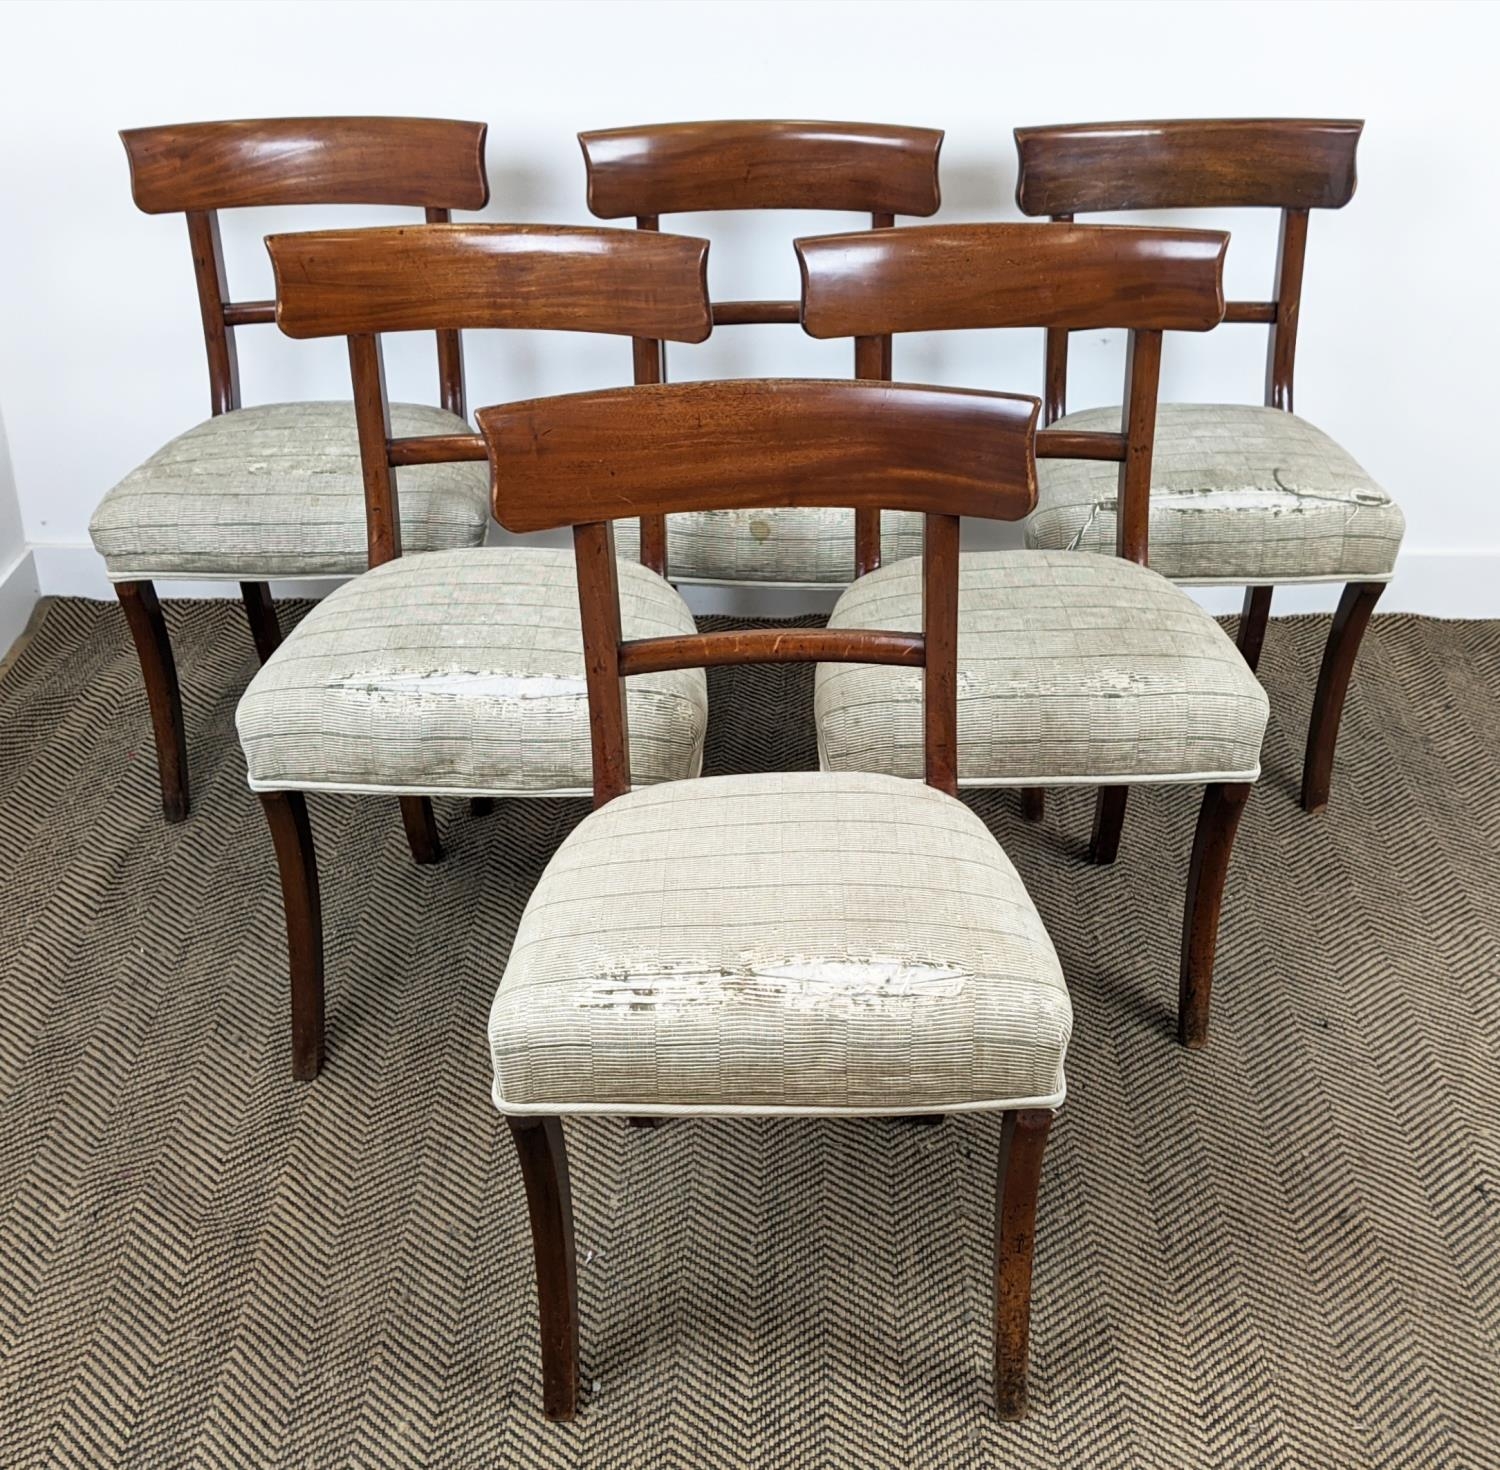 DINING CHAIRS, a set of six, circa 1830, mahogany with stuffover seats, 86cm H x 49cm x 48cm. (6) - Image 4 of 16